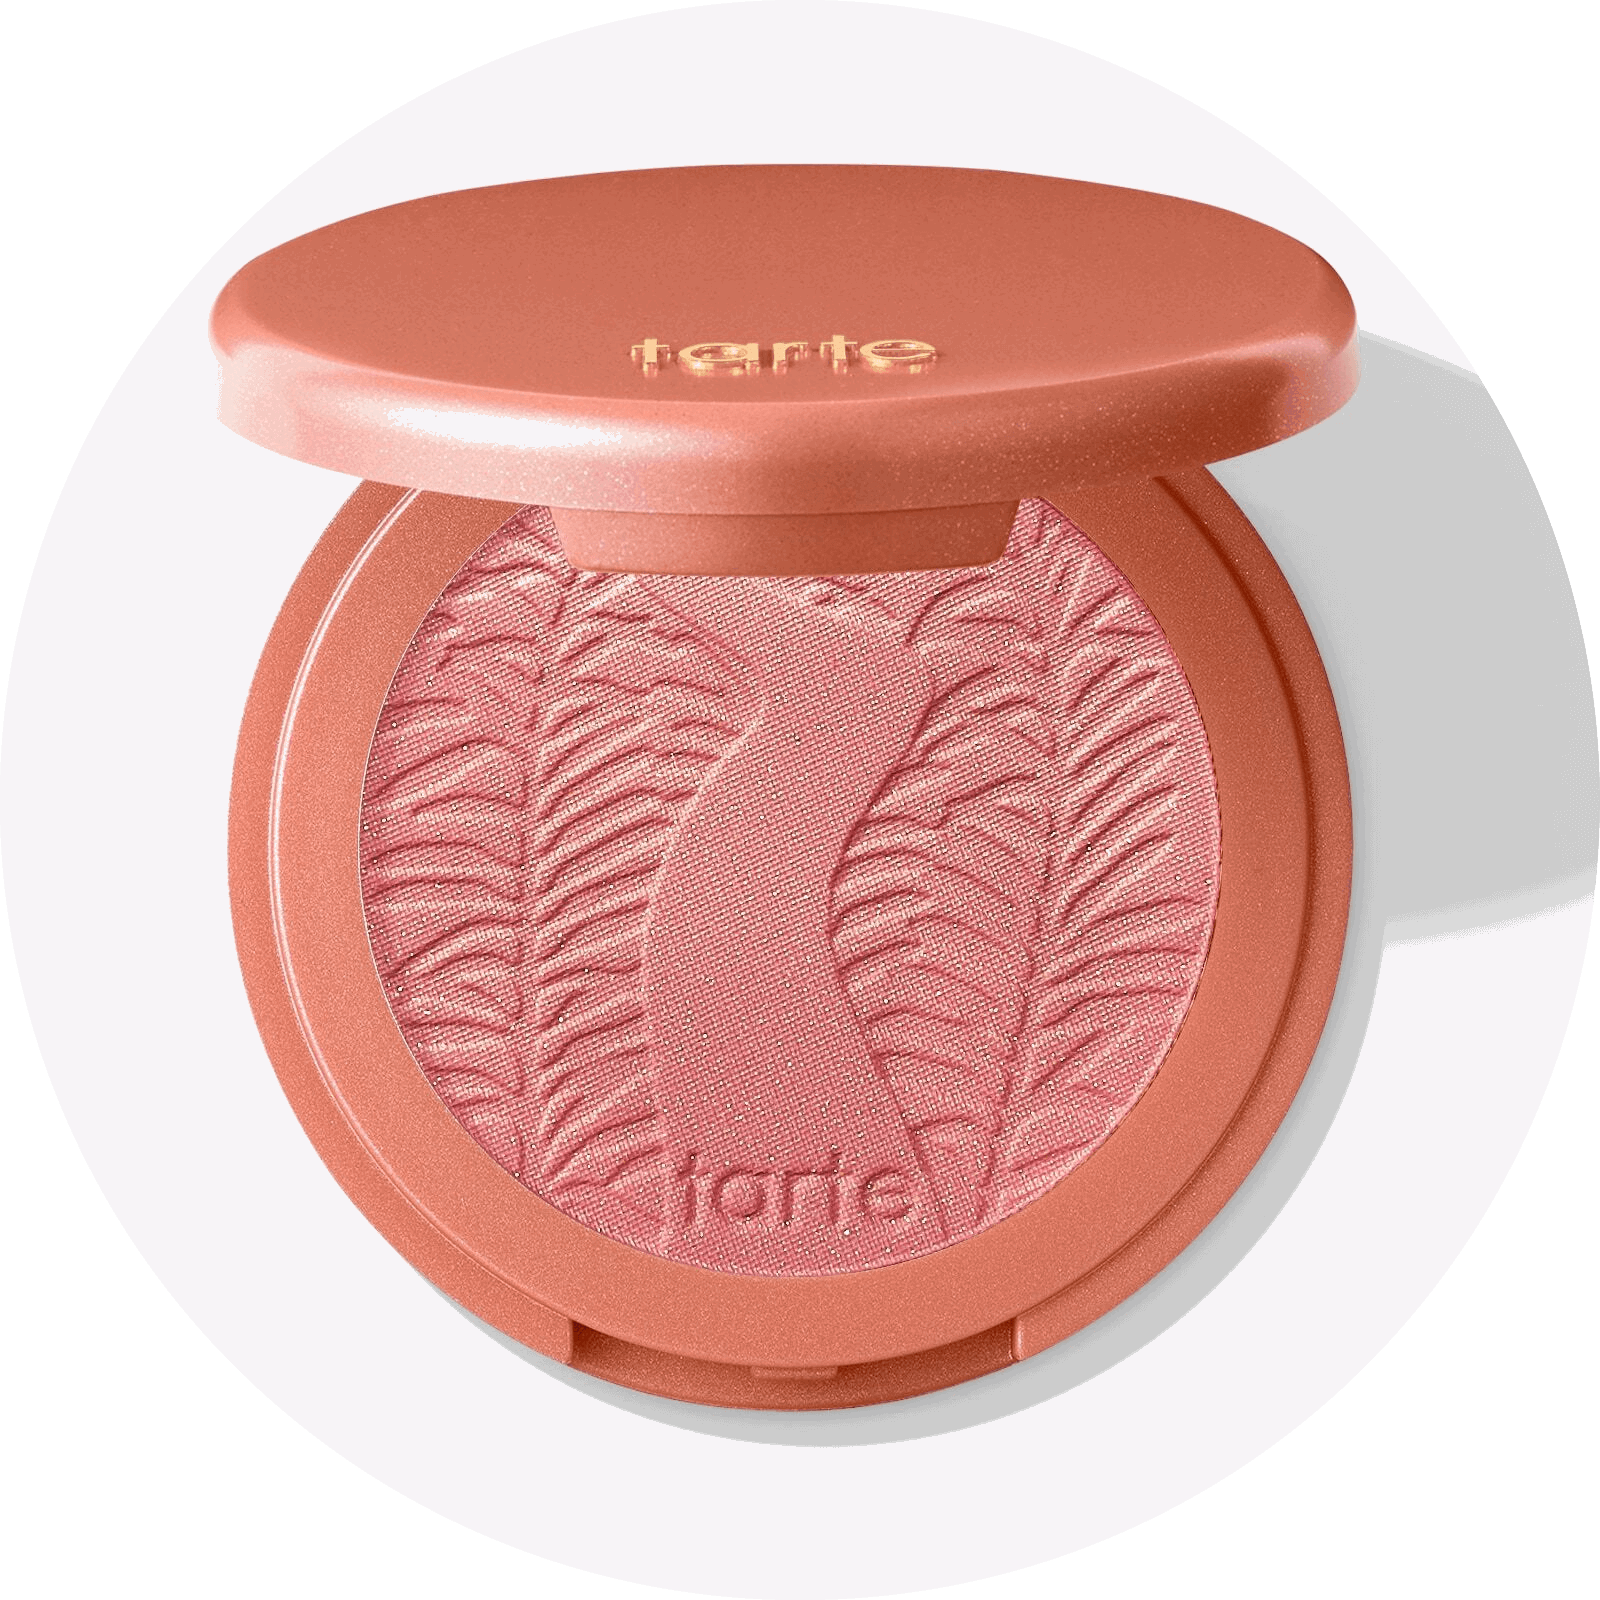 Amazonian clay 12-hour blush NudeFace Chile